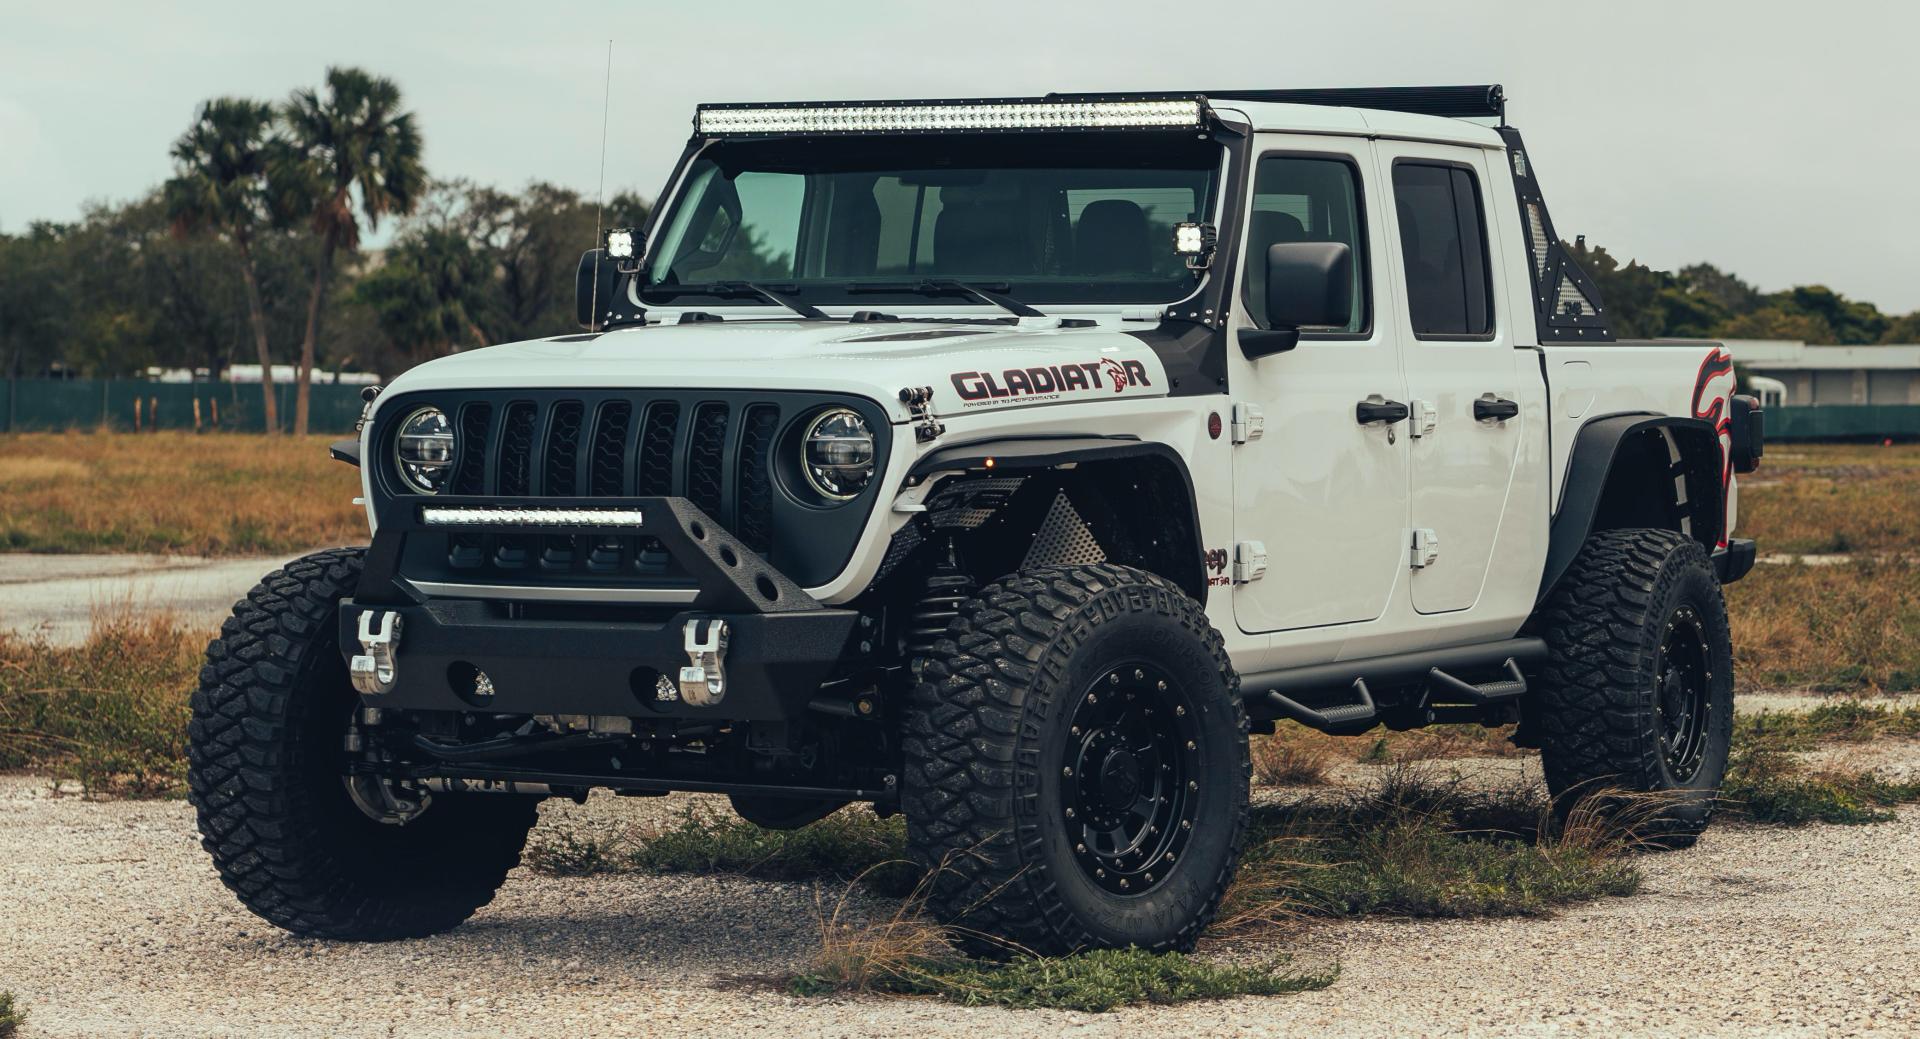 Custom Jeep Gladiator Hellcat With Off-Road Performance Upgrades Is So Sick  | Carscoops